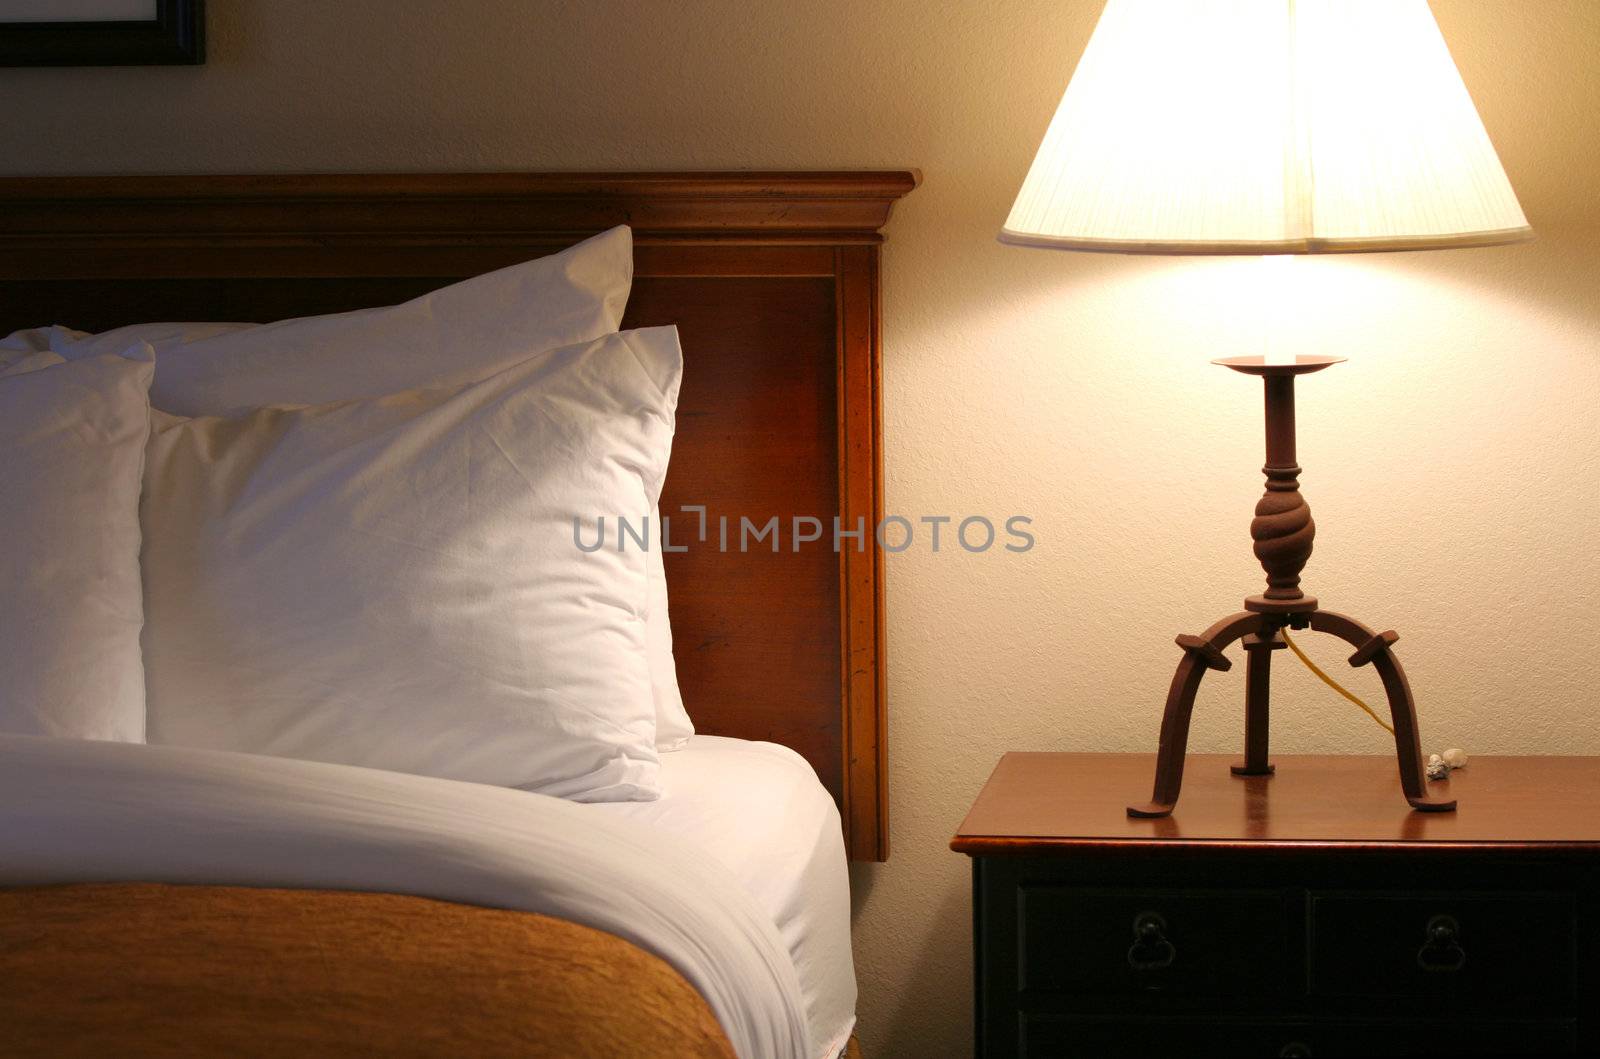 Comfortable, relaxing bed with lamp on side table